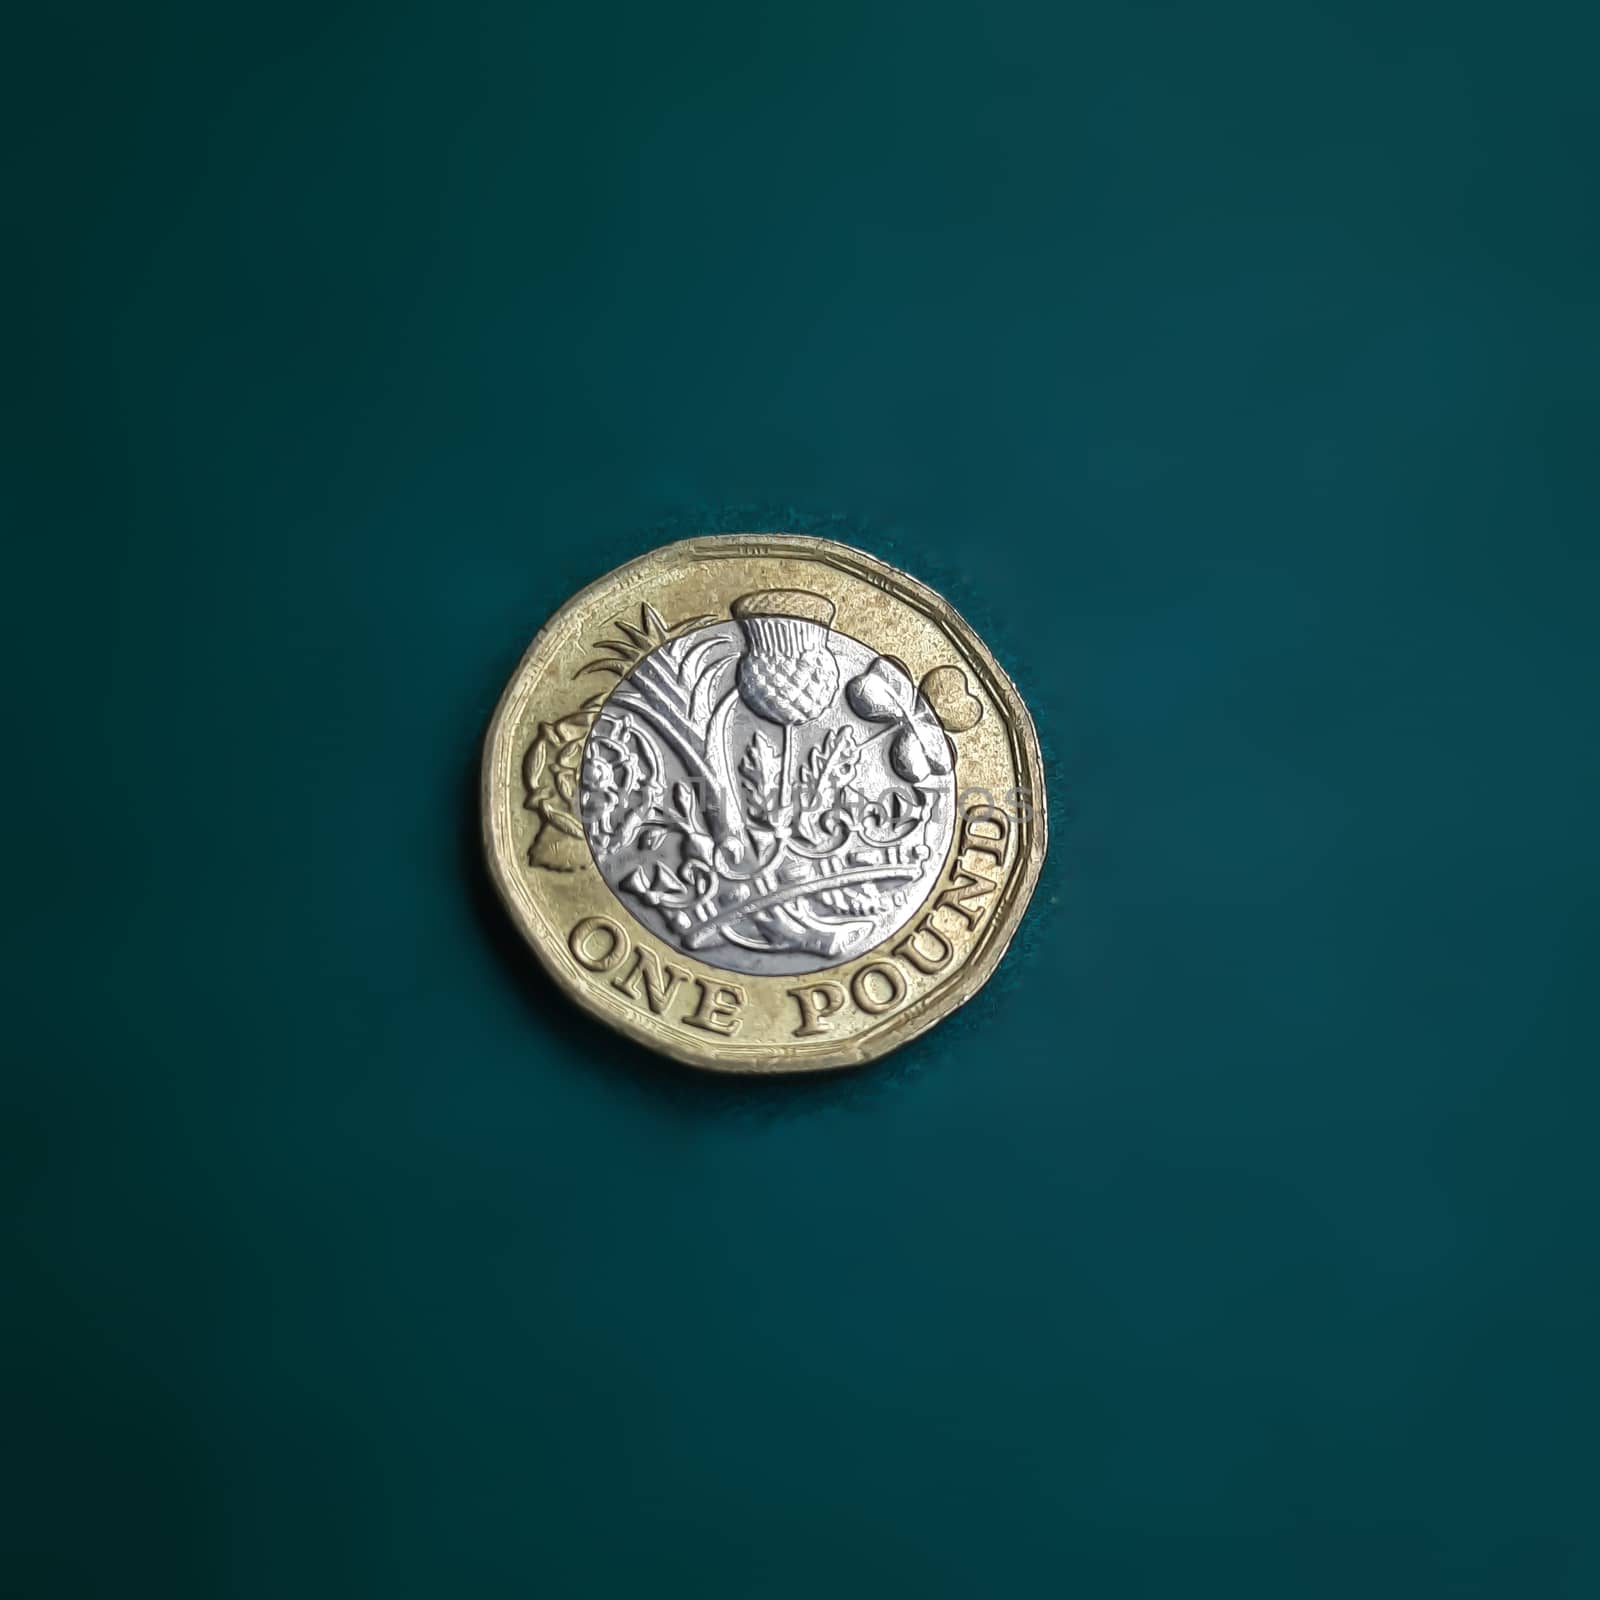 One pound coin is placed in green chart background